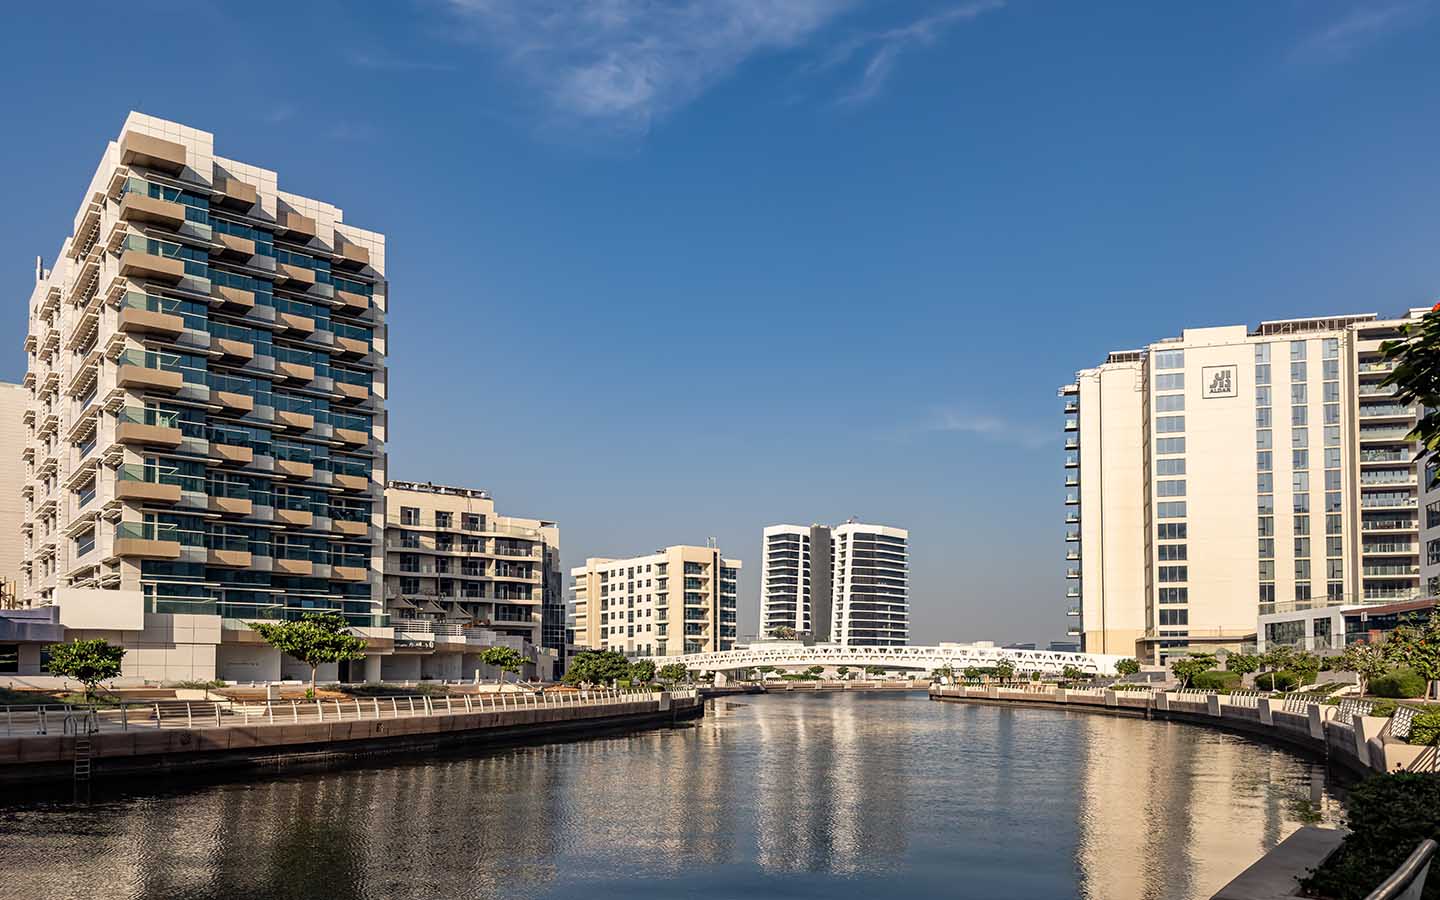 al raha beach is a popular area to rent waterfront flats in abu dhabi